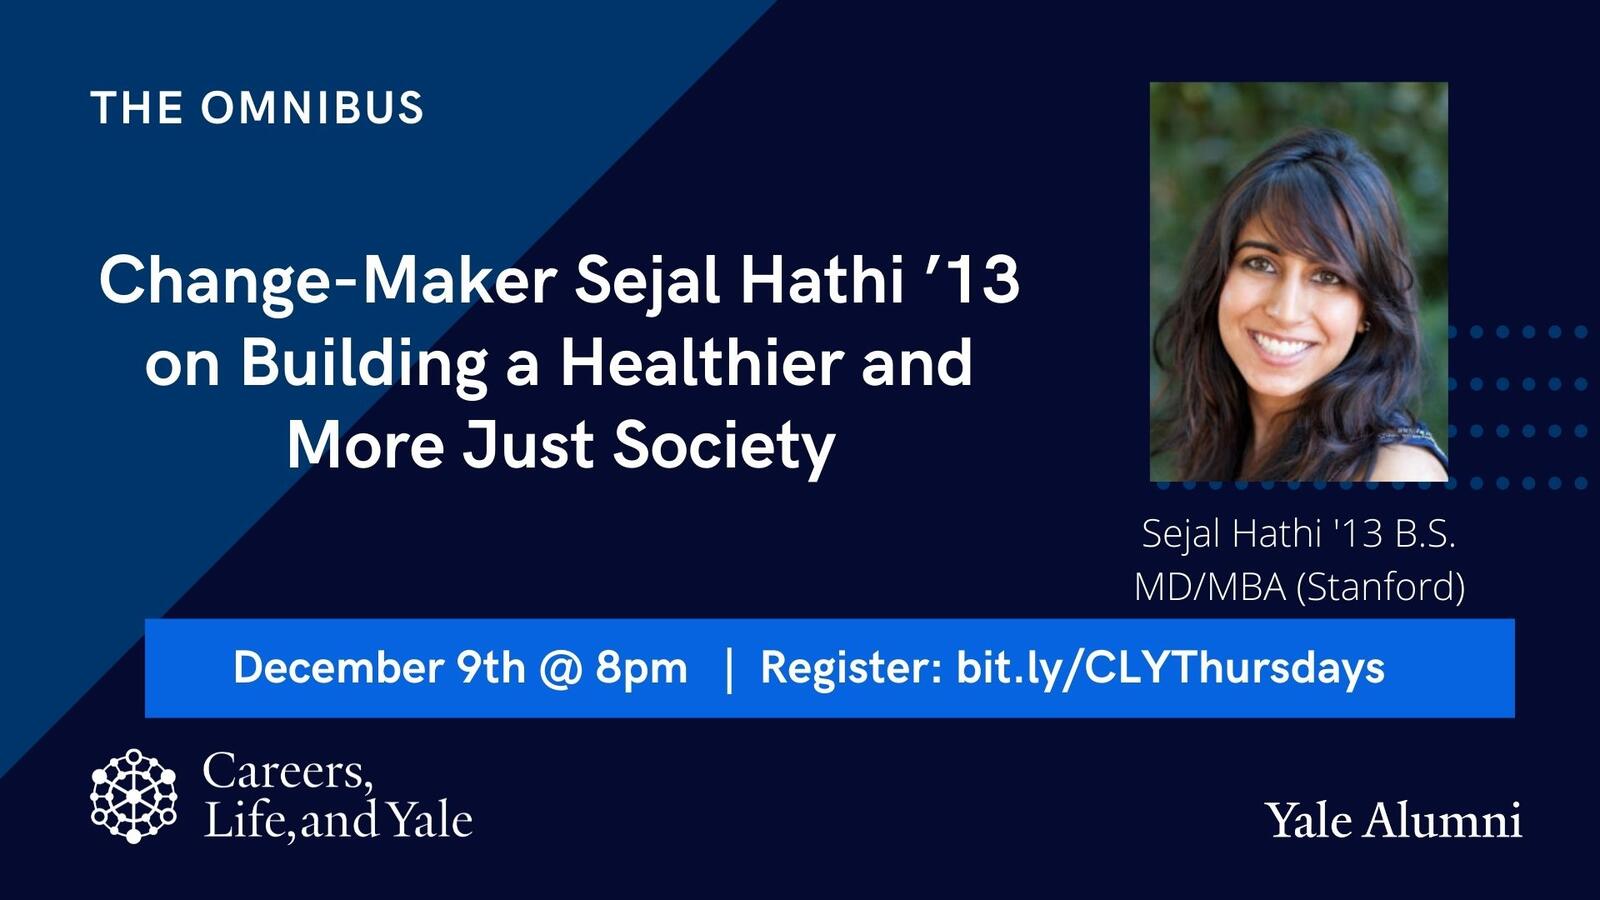 Change-Maker Sejal Hathi ’13 on Building a Healthier and More Just Society